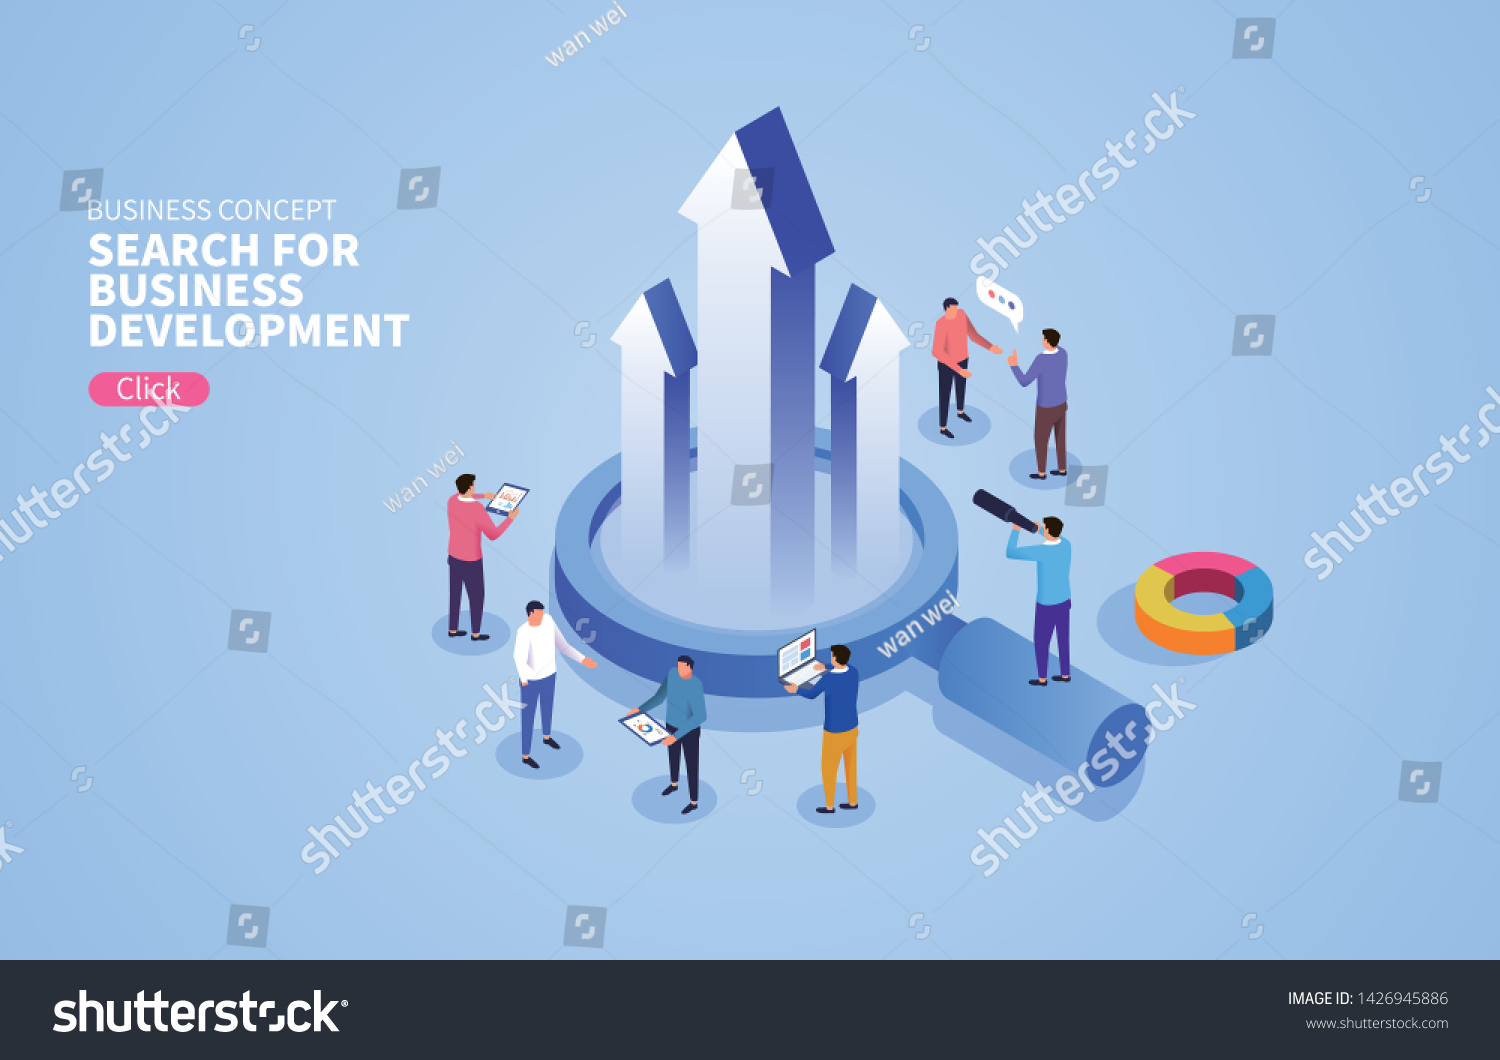 SVG of Business people discuss the business together around a magnifying glass svg